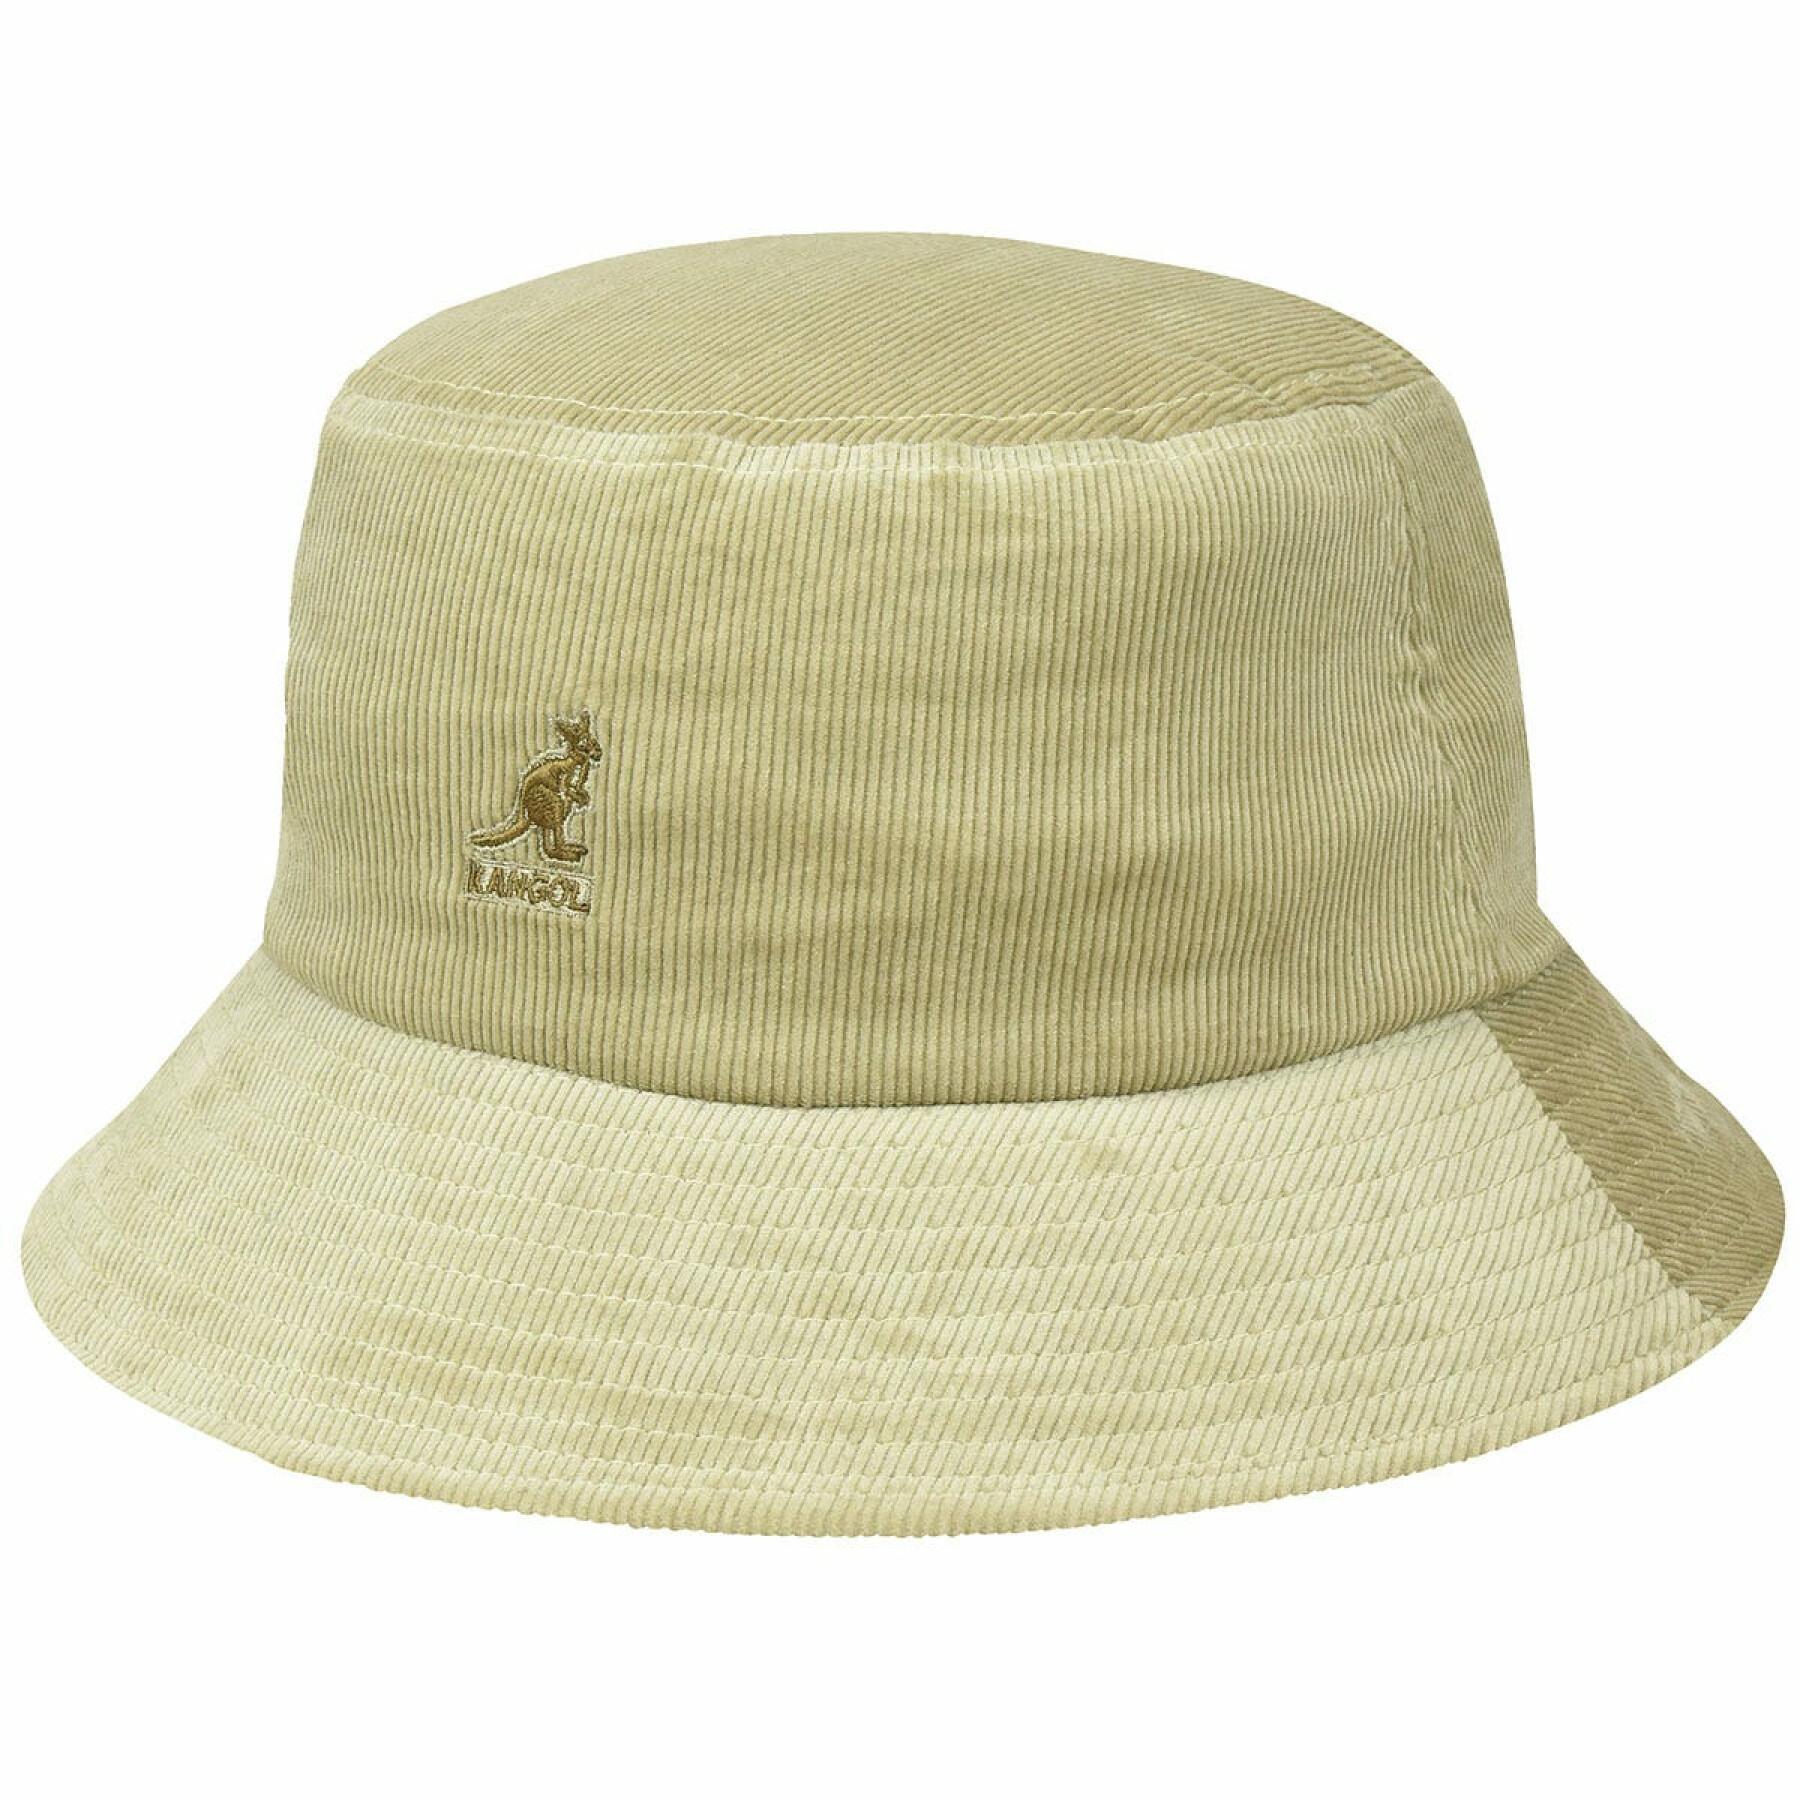 Kangol bucket hat with cord